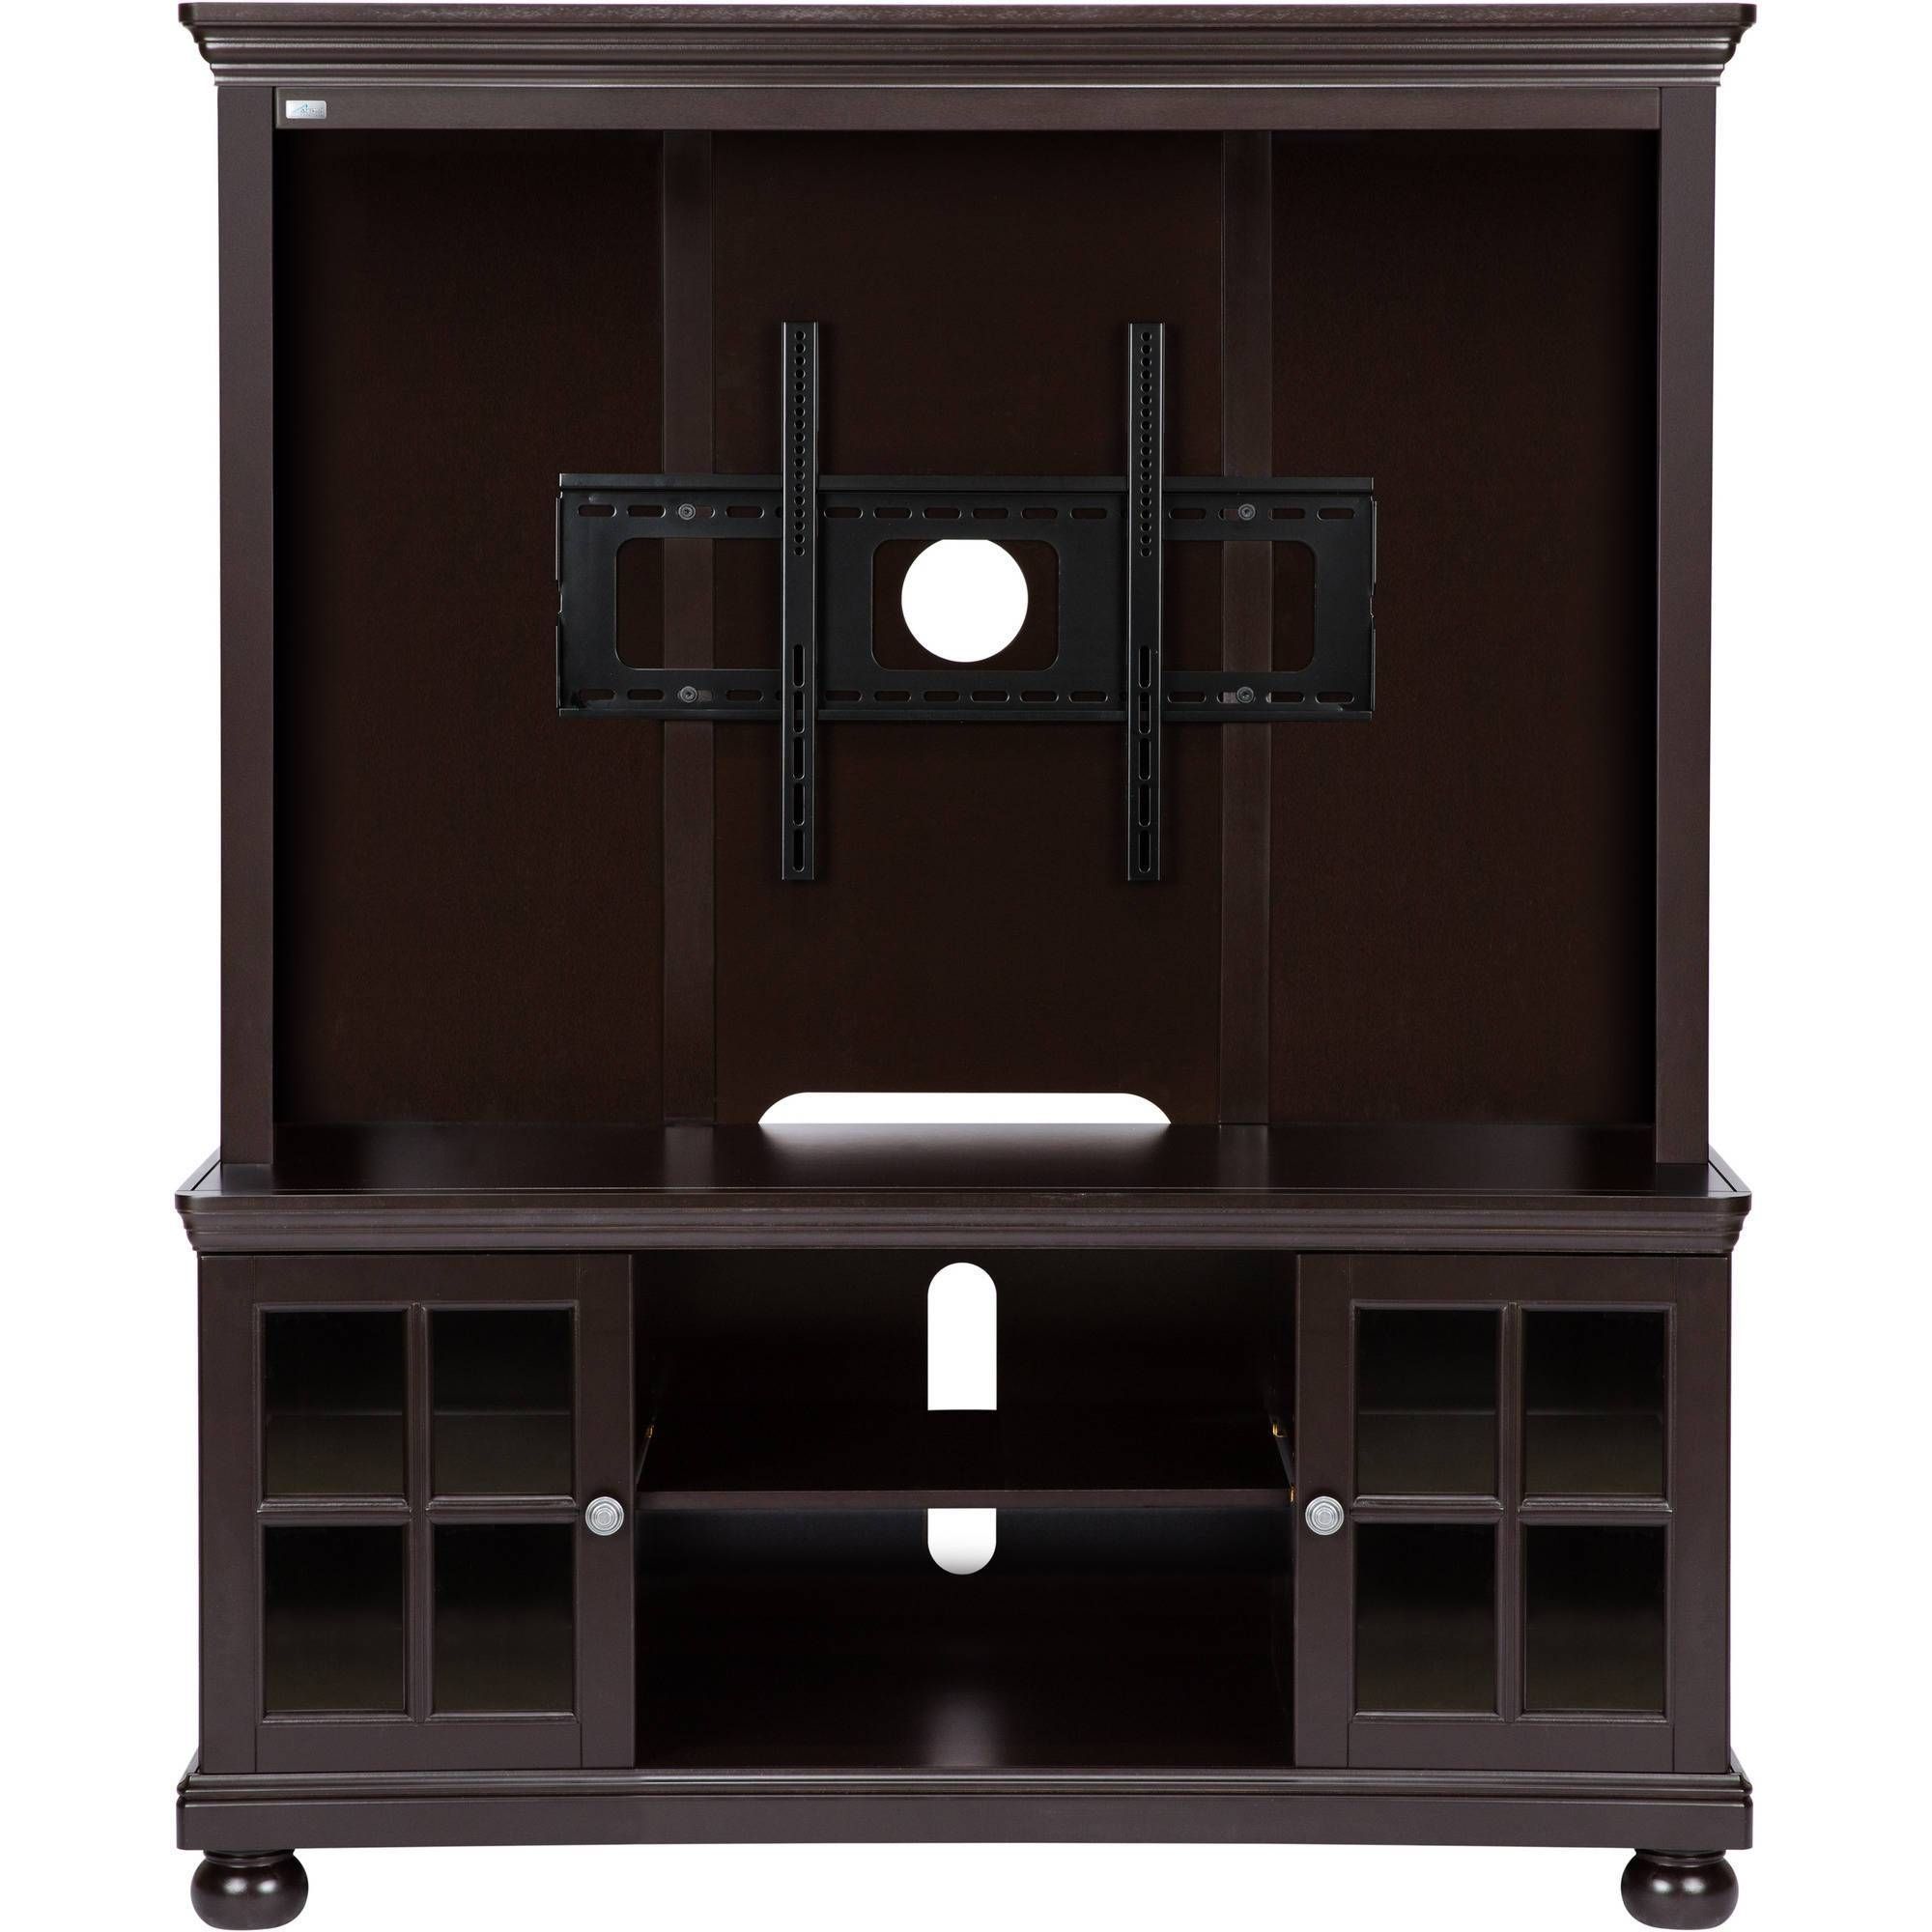 Better Home And Gardens 52" Flat Screen Tv Stand With Hutch Regarding Tv Hutch Cabinets (View 7 of 15)